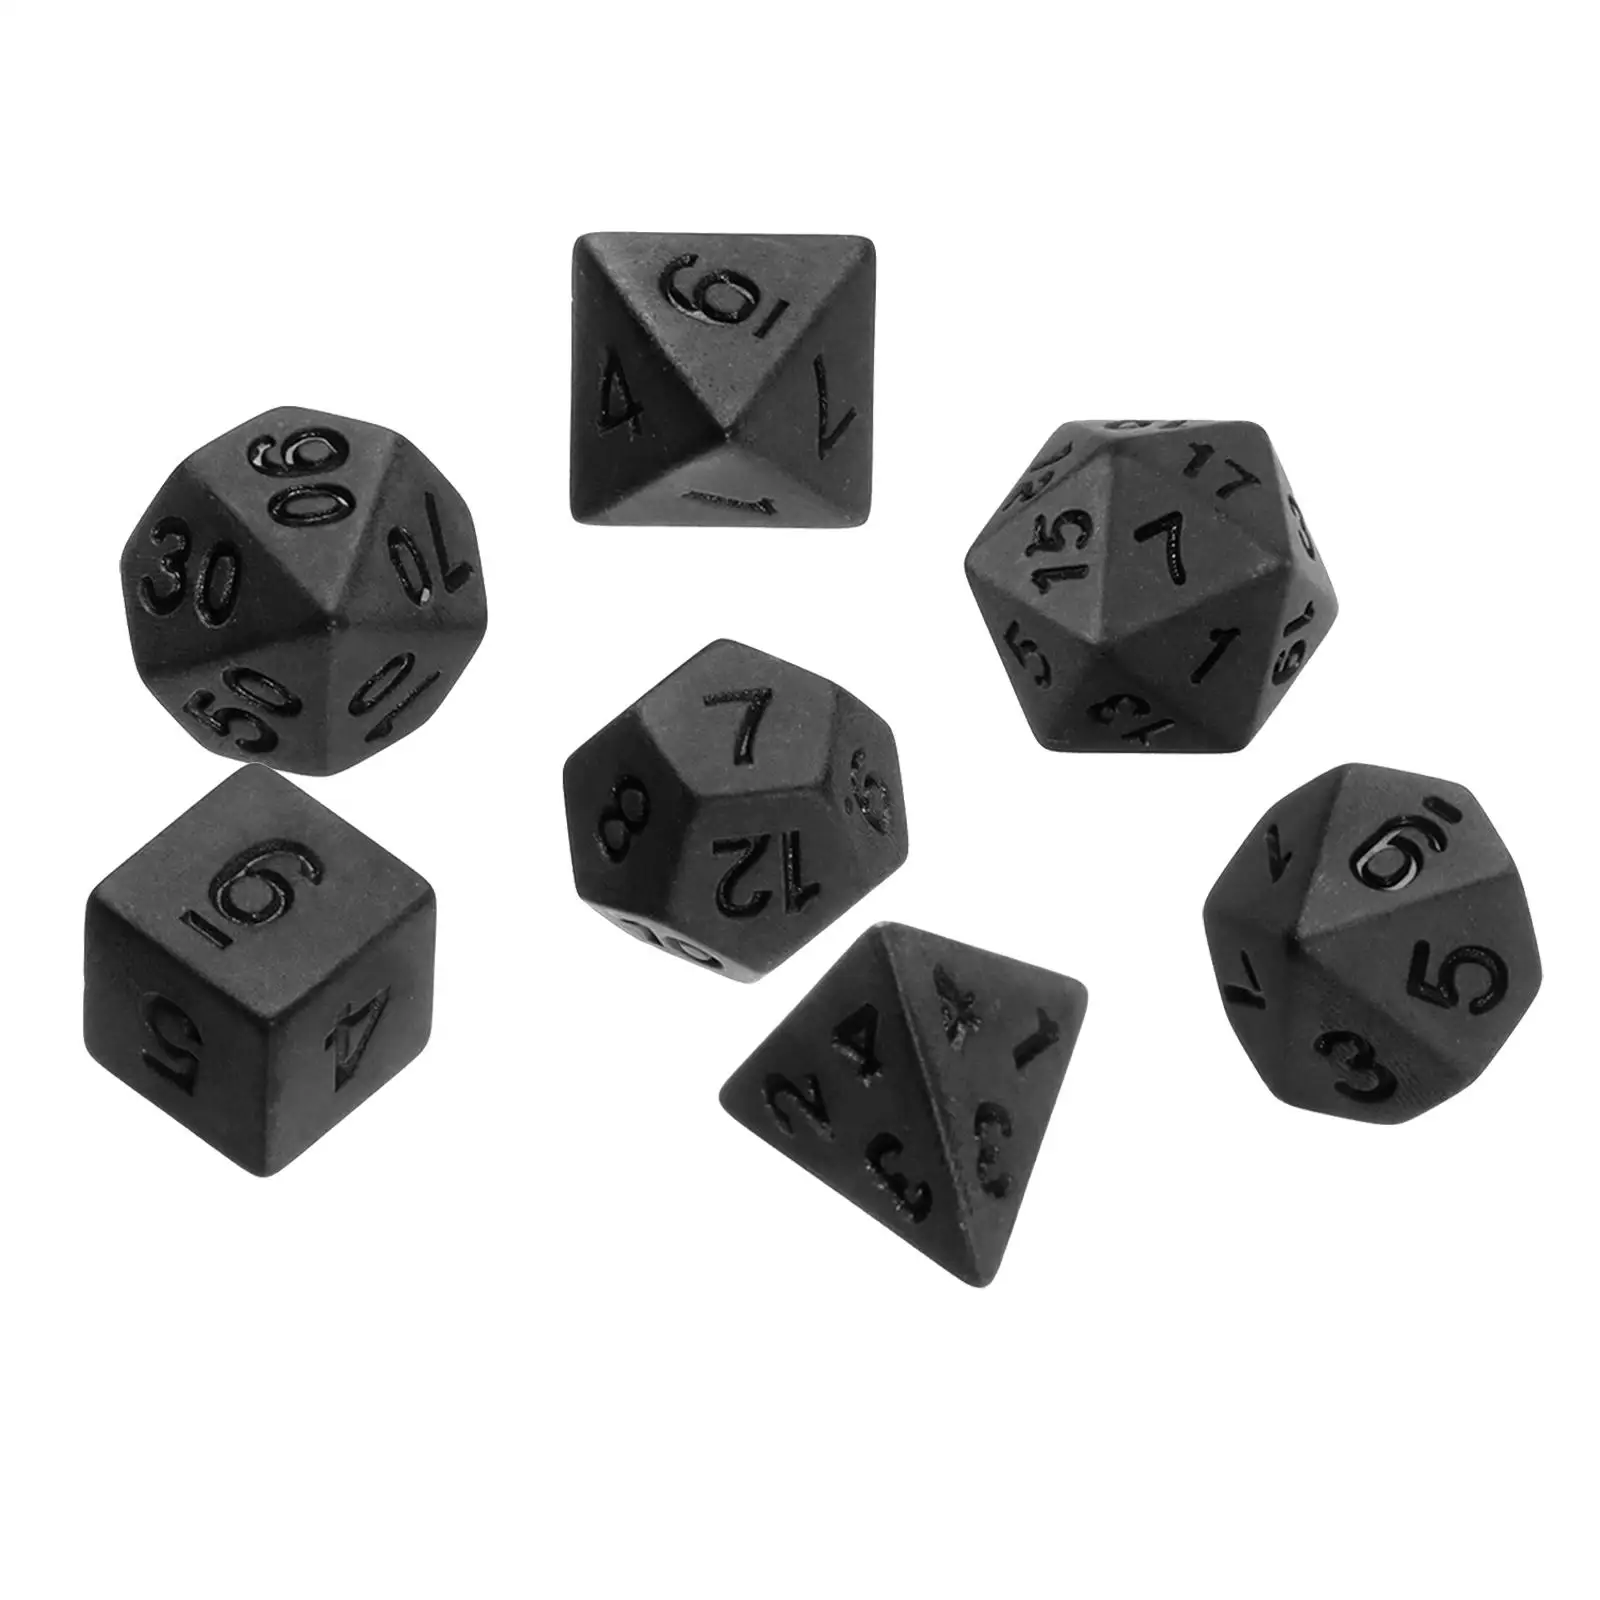 7 Pieces Polyhedral Dice black Multi Sided RPG Dices for Entertainment